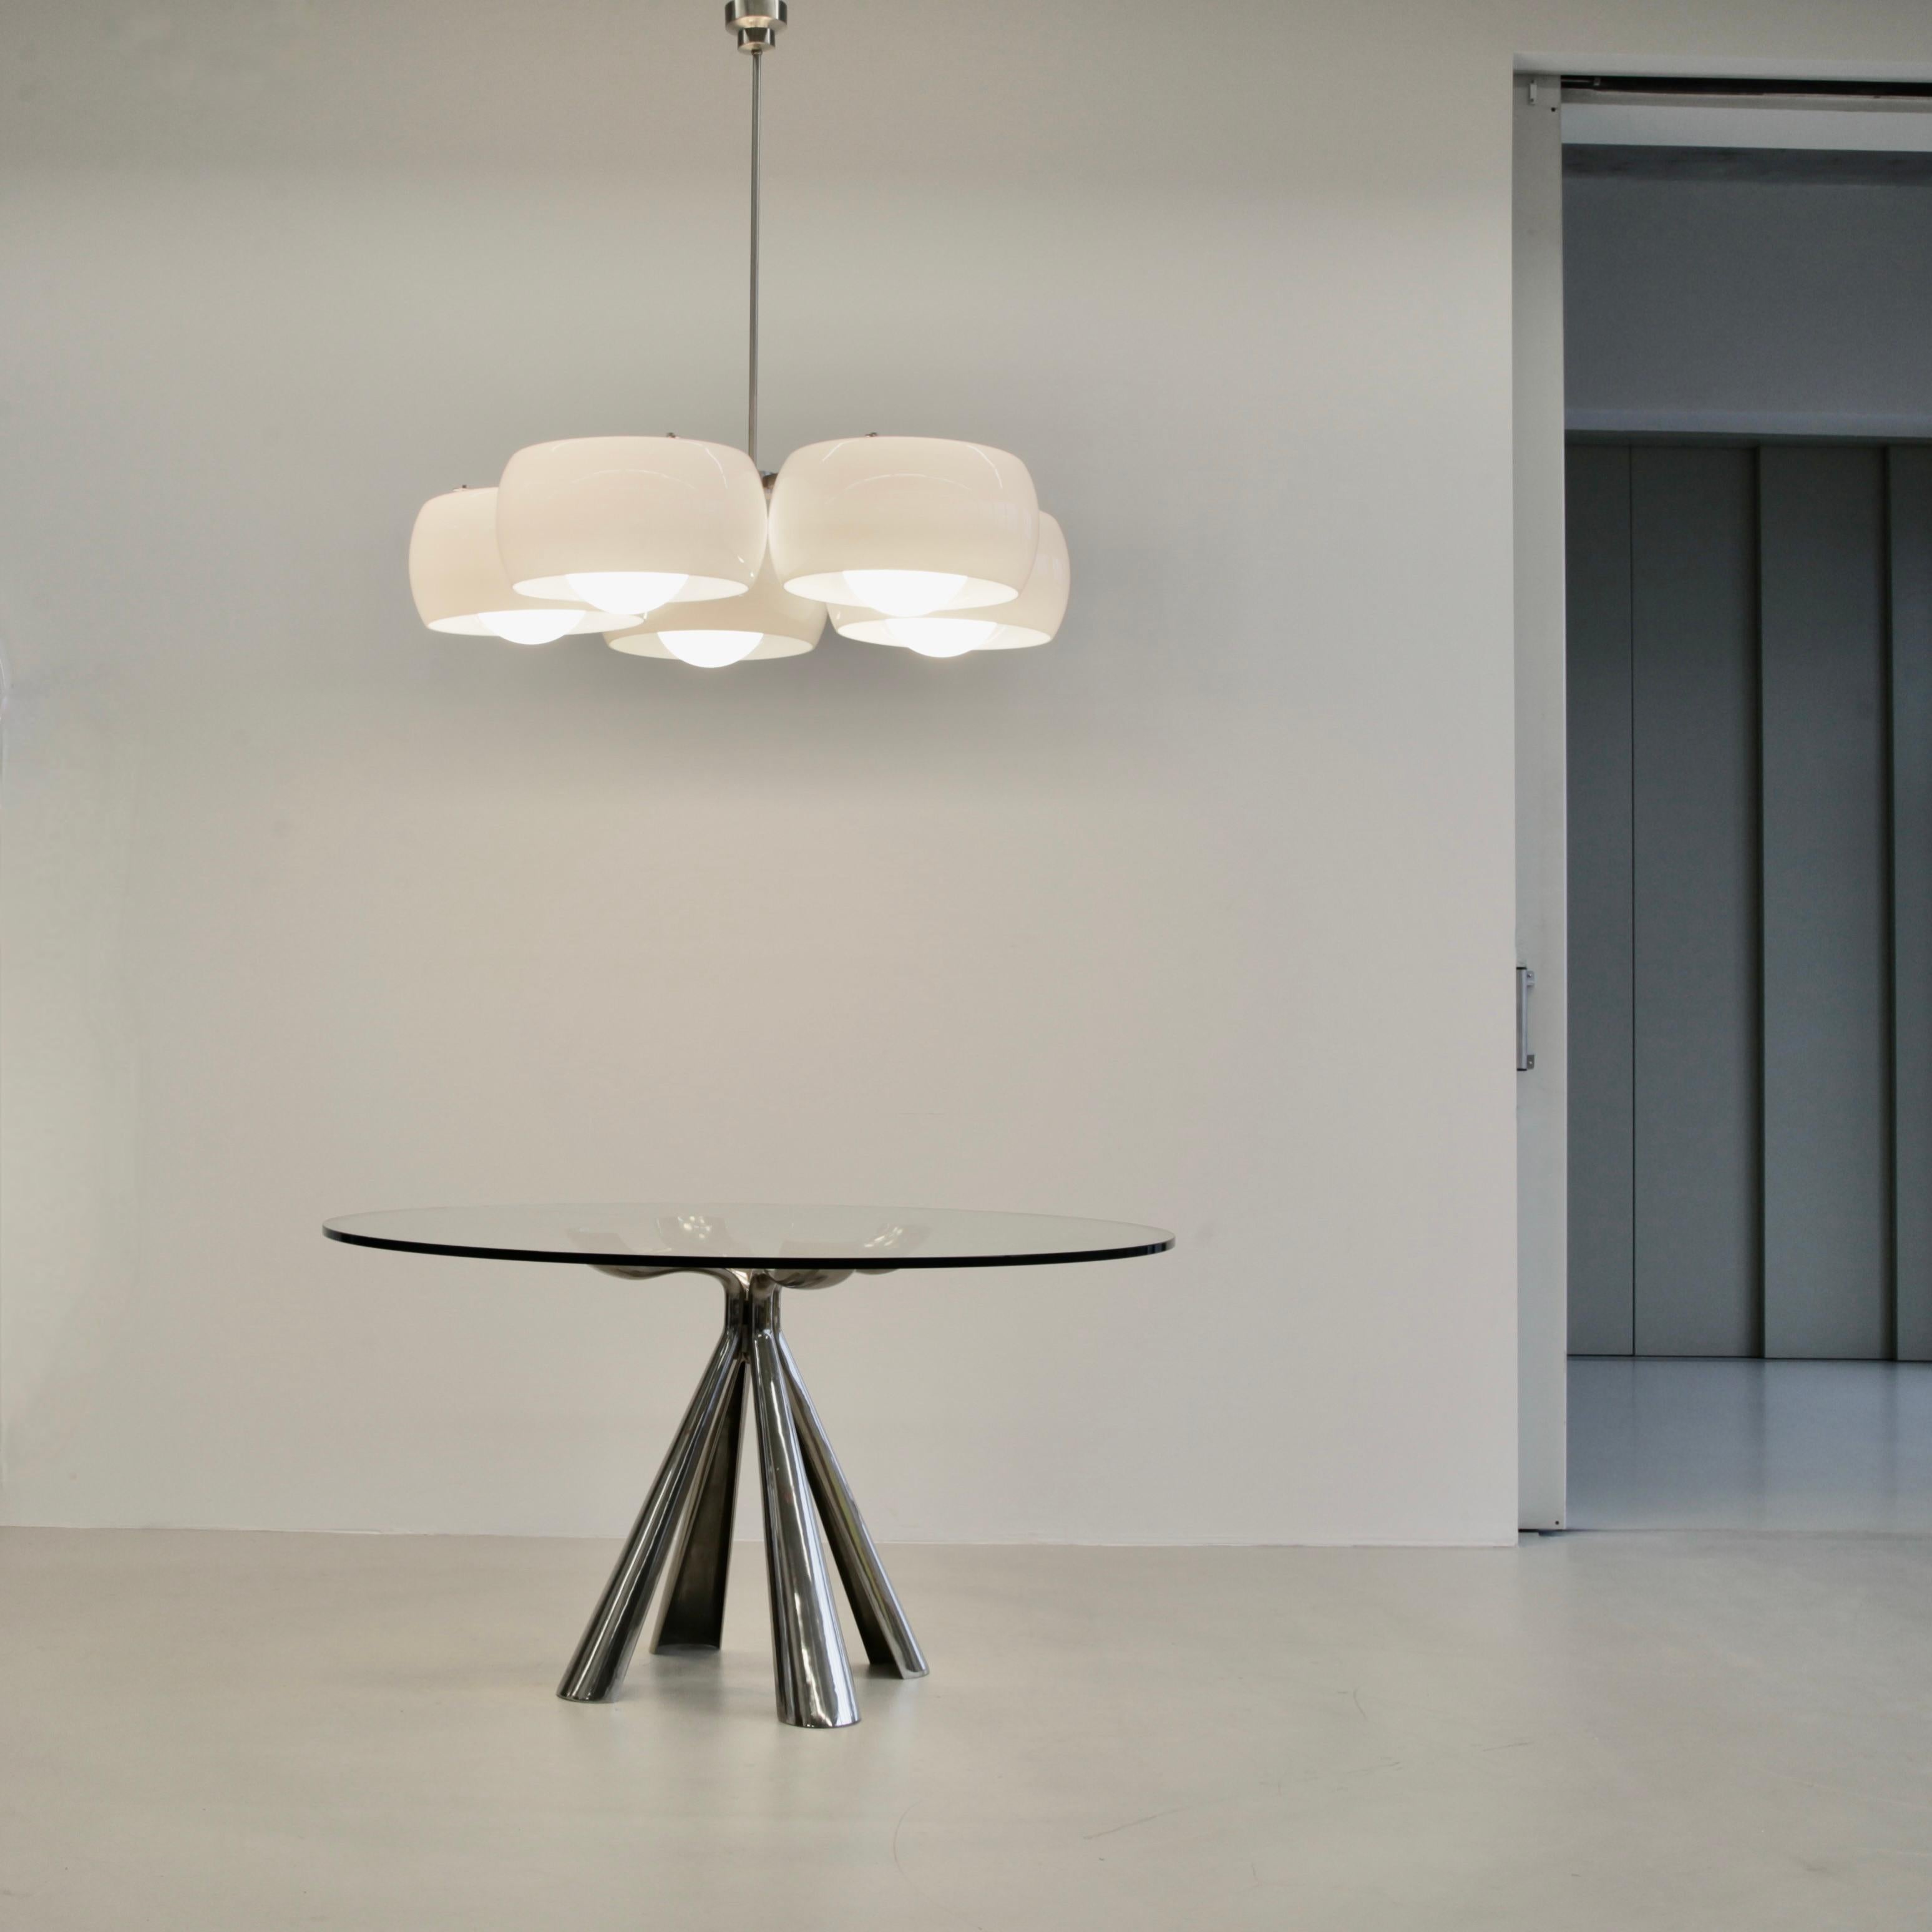 Metal Large Ceiling Lamp Pentaclinio Designed by Vico Magistretti for Artemide, 1961